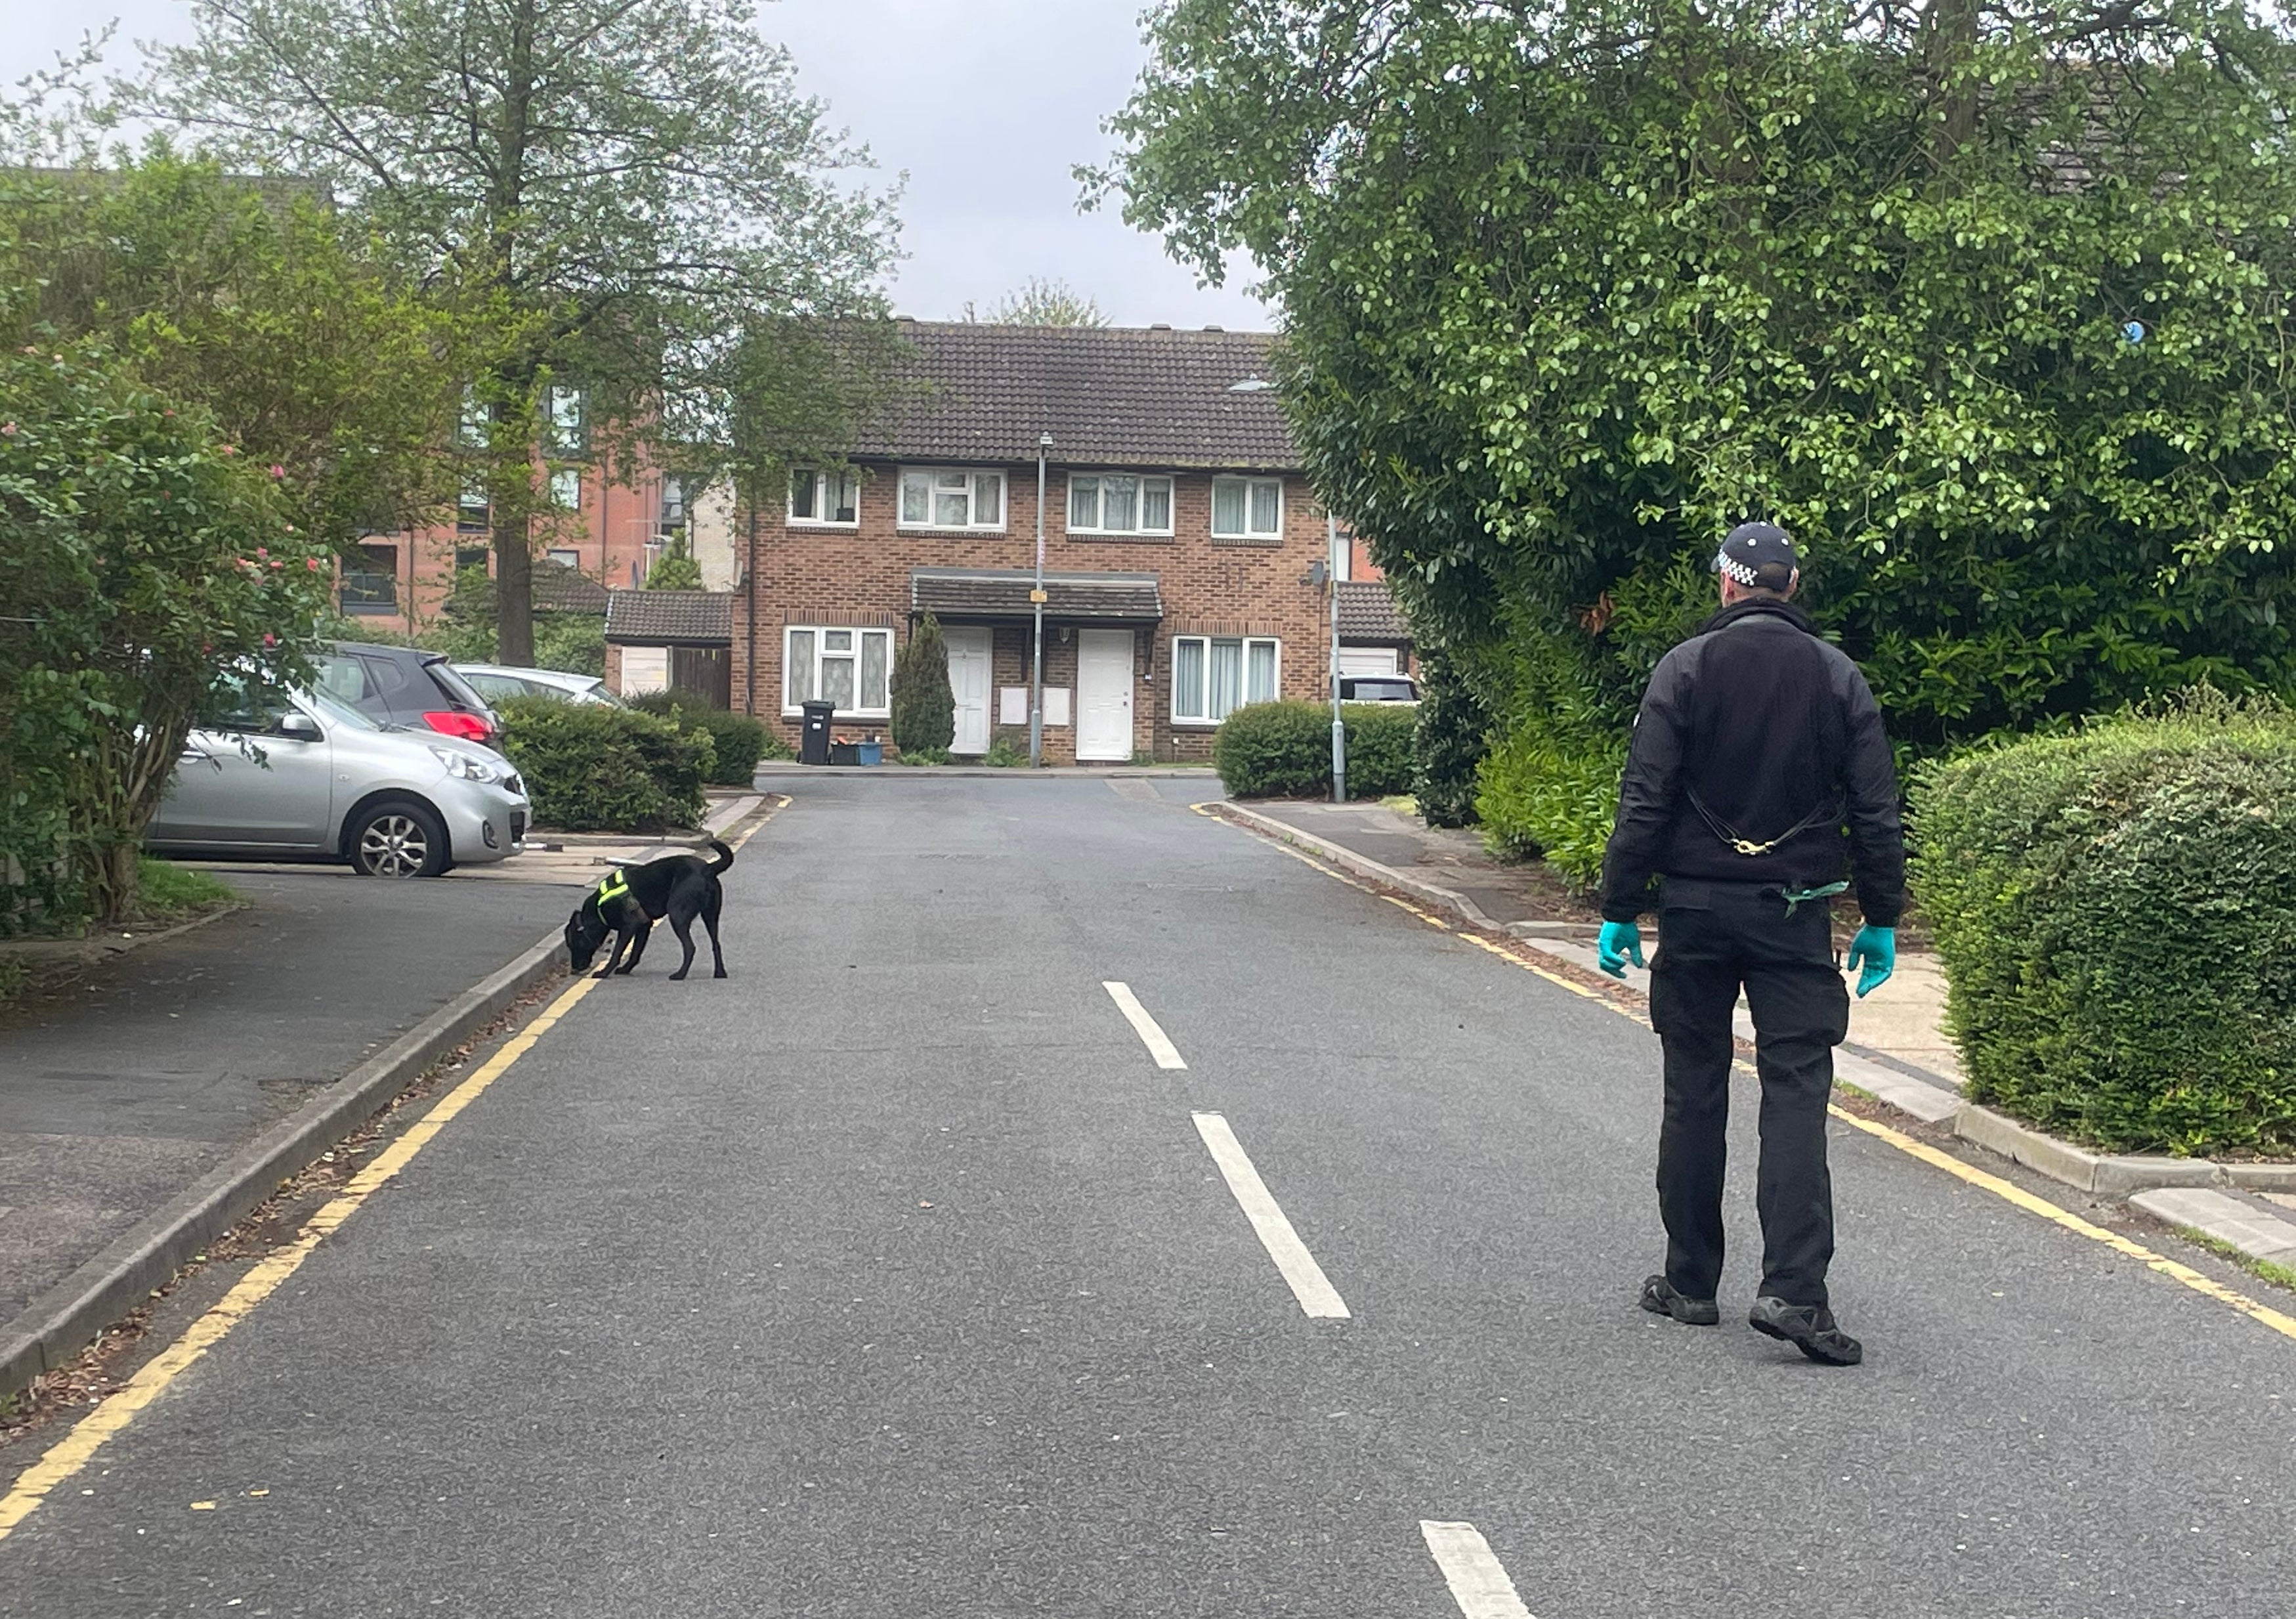 A police sniffer dog sweeps through the streets around the police cordon in Hainault, north east London